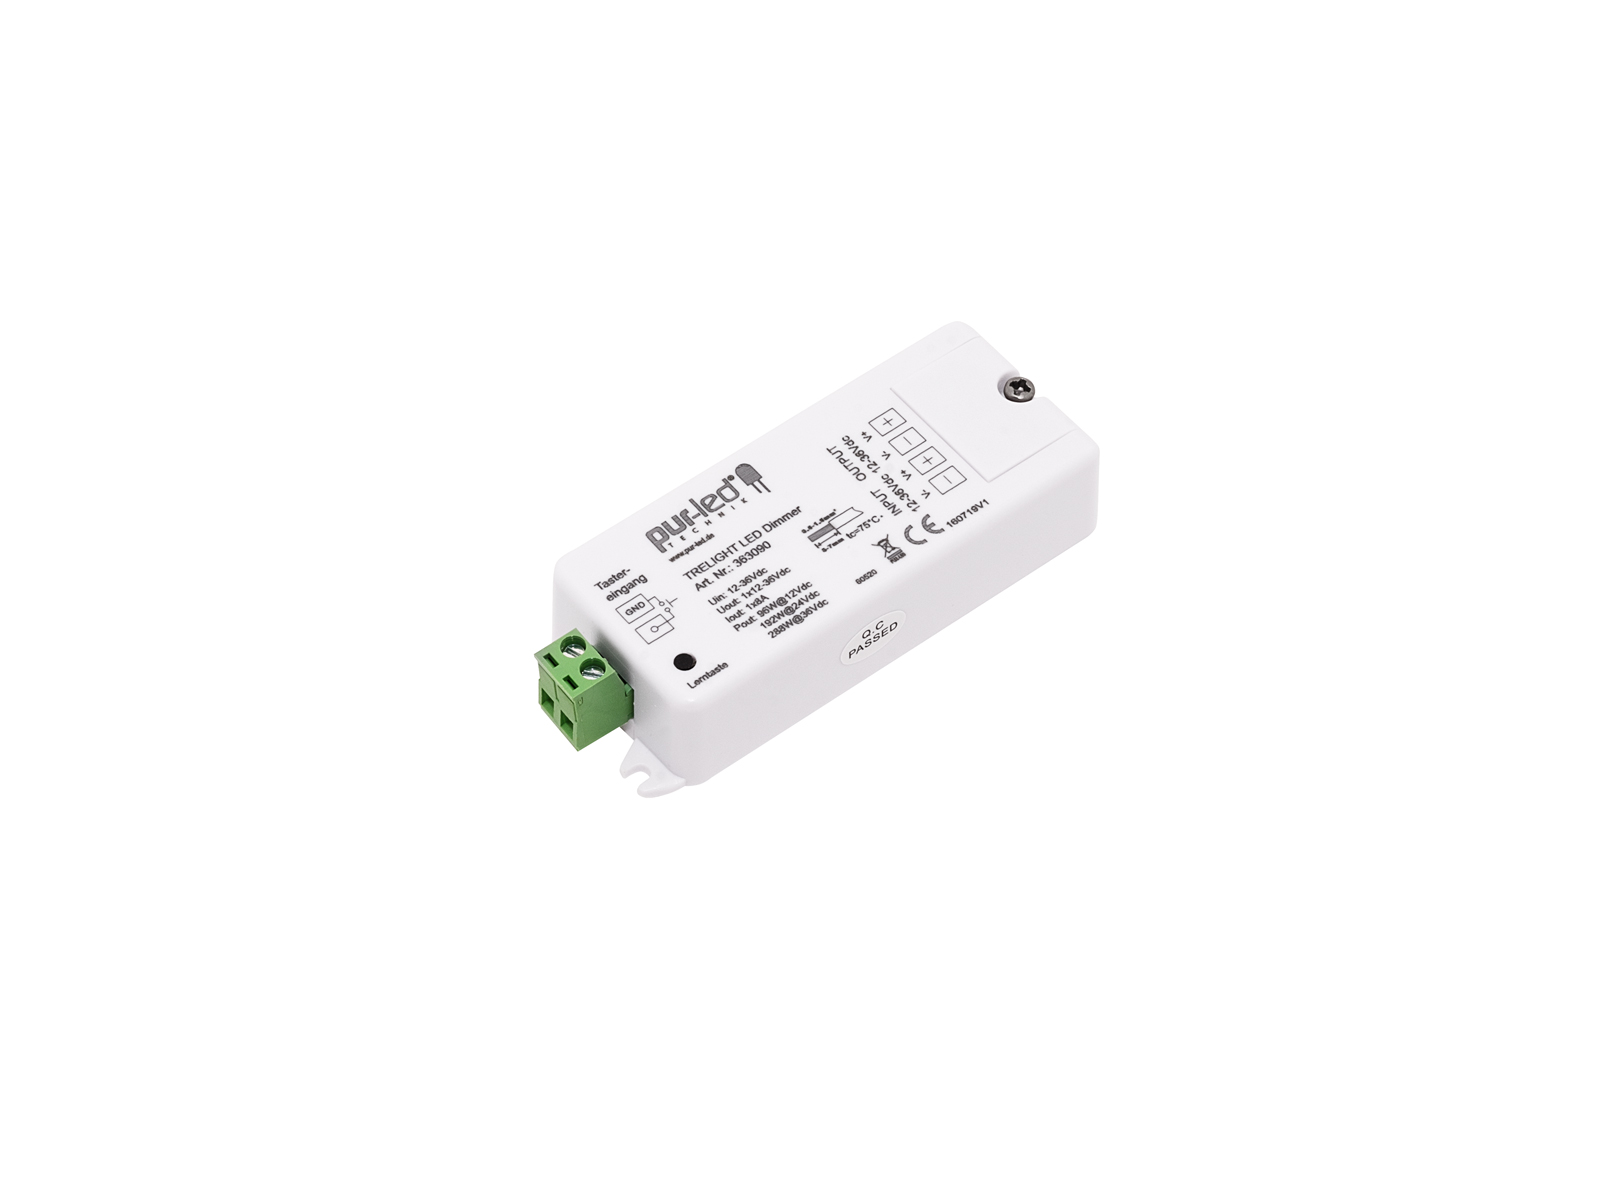 TRELIGHT LED Dimmer Funk Empfänger Tastereingang 12-36Vdc 1x8A kaufen |  PUR-LED